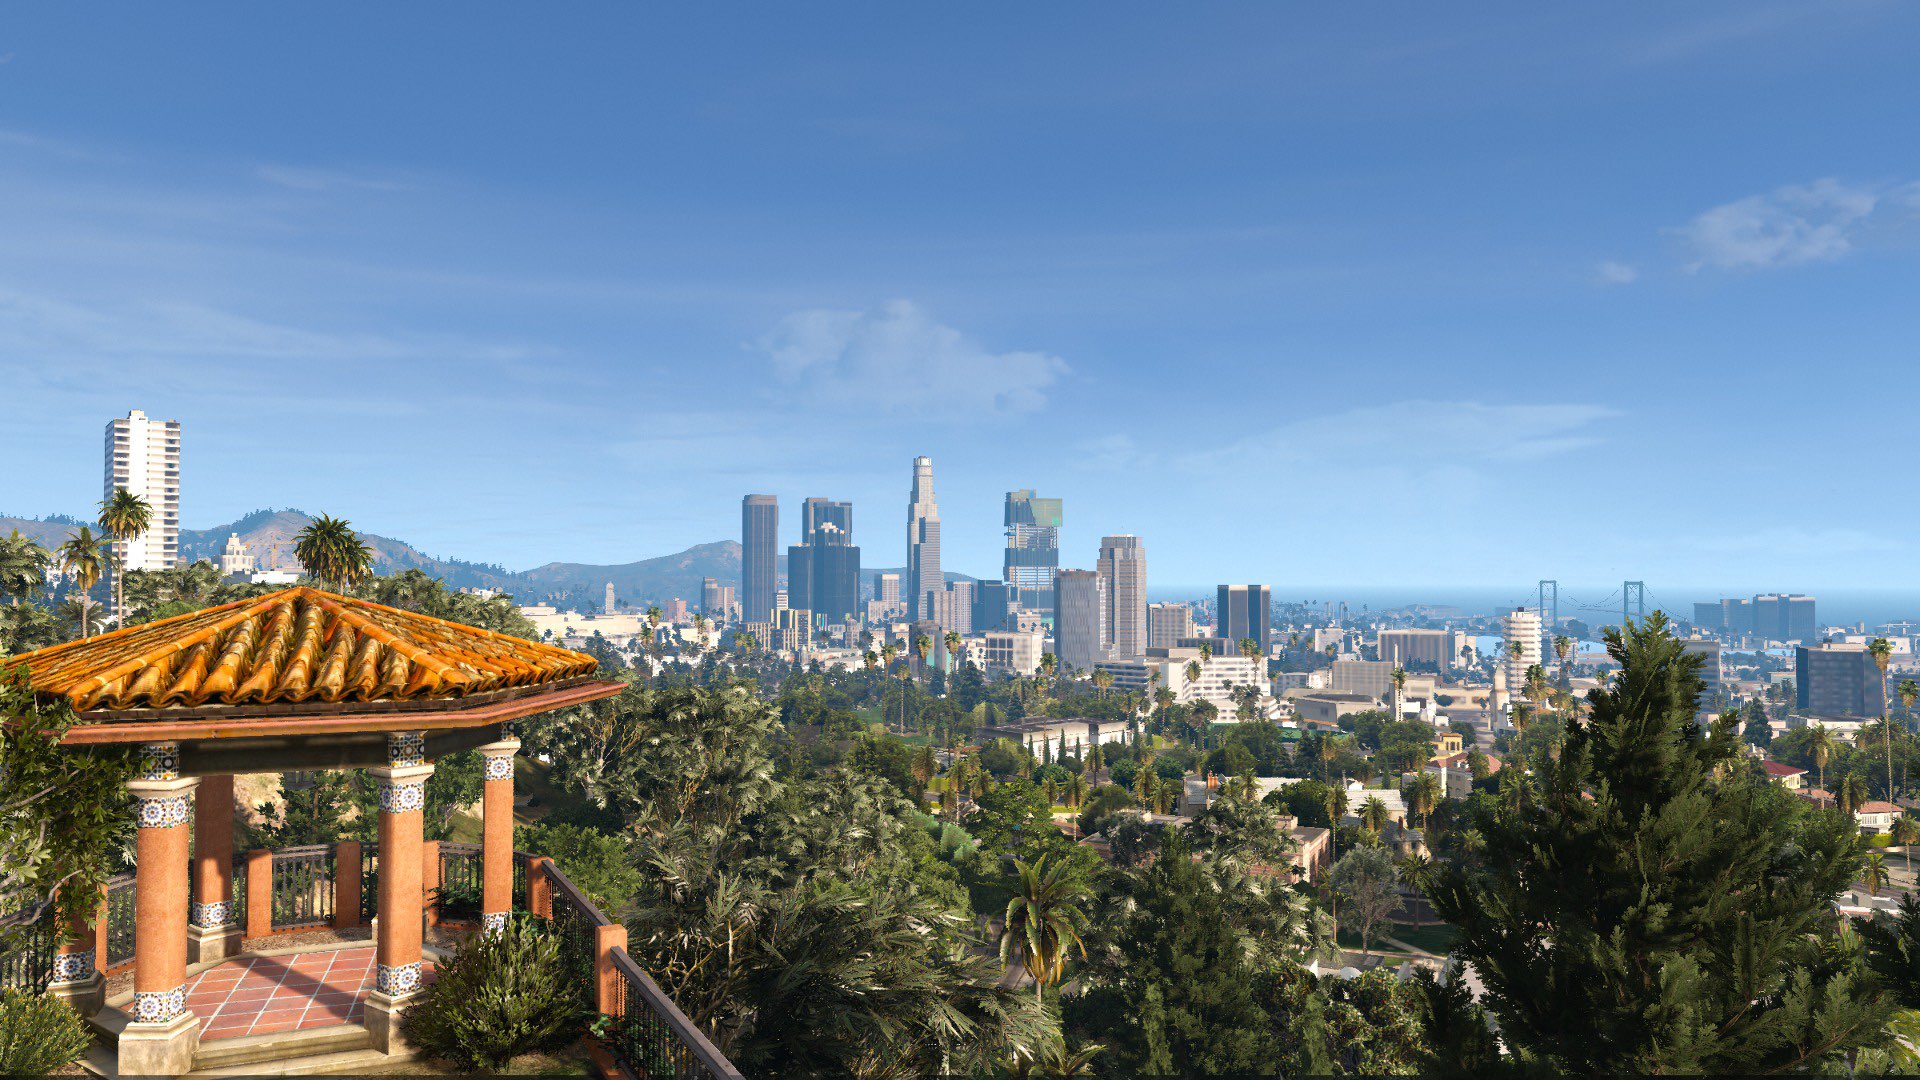 General 1920x1080 NaturalVision Evolved Los Santos Los Angeles city Grand Theft Auto V Rockstar Games clouds building video games FiveM sky trees video game art screen shot palm trees cityscape CGI